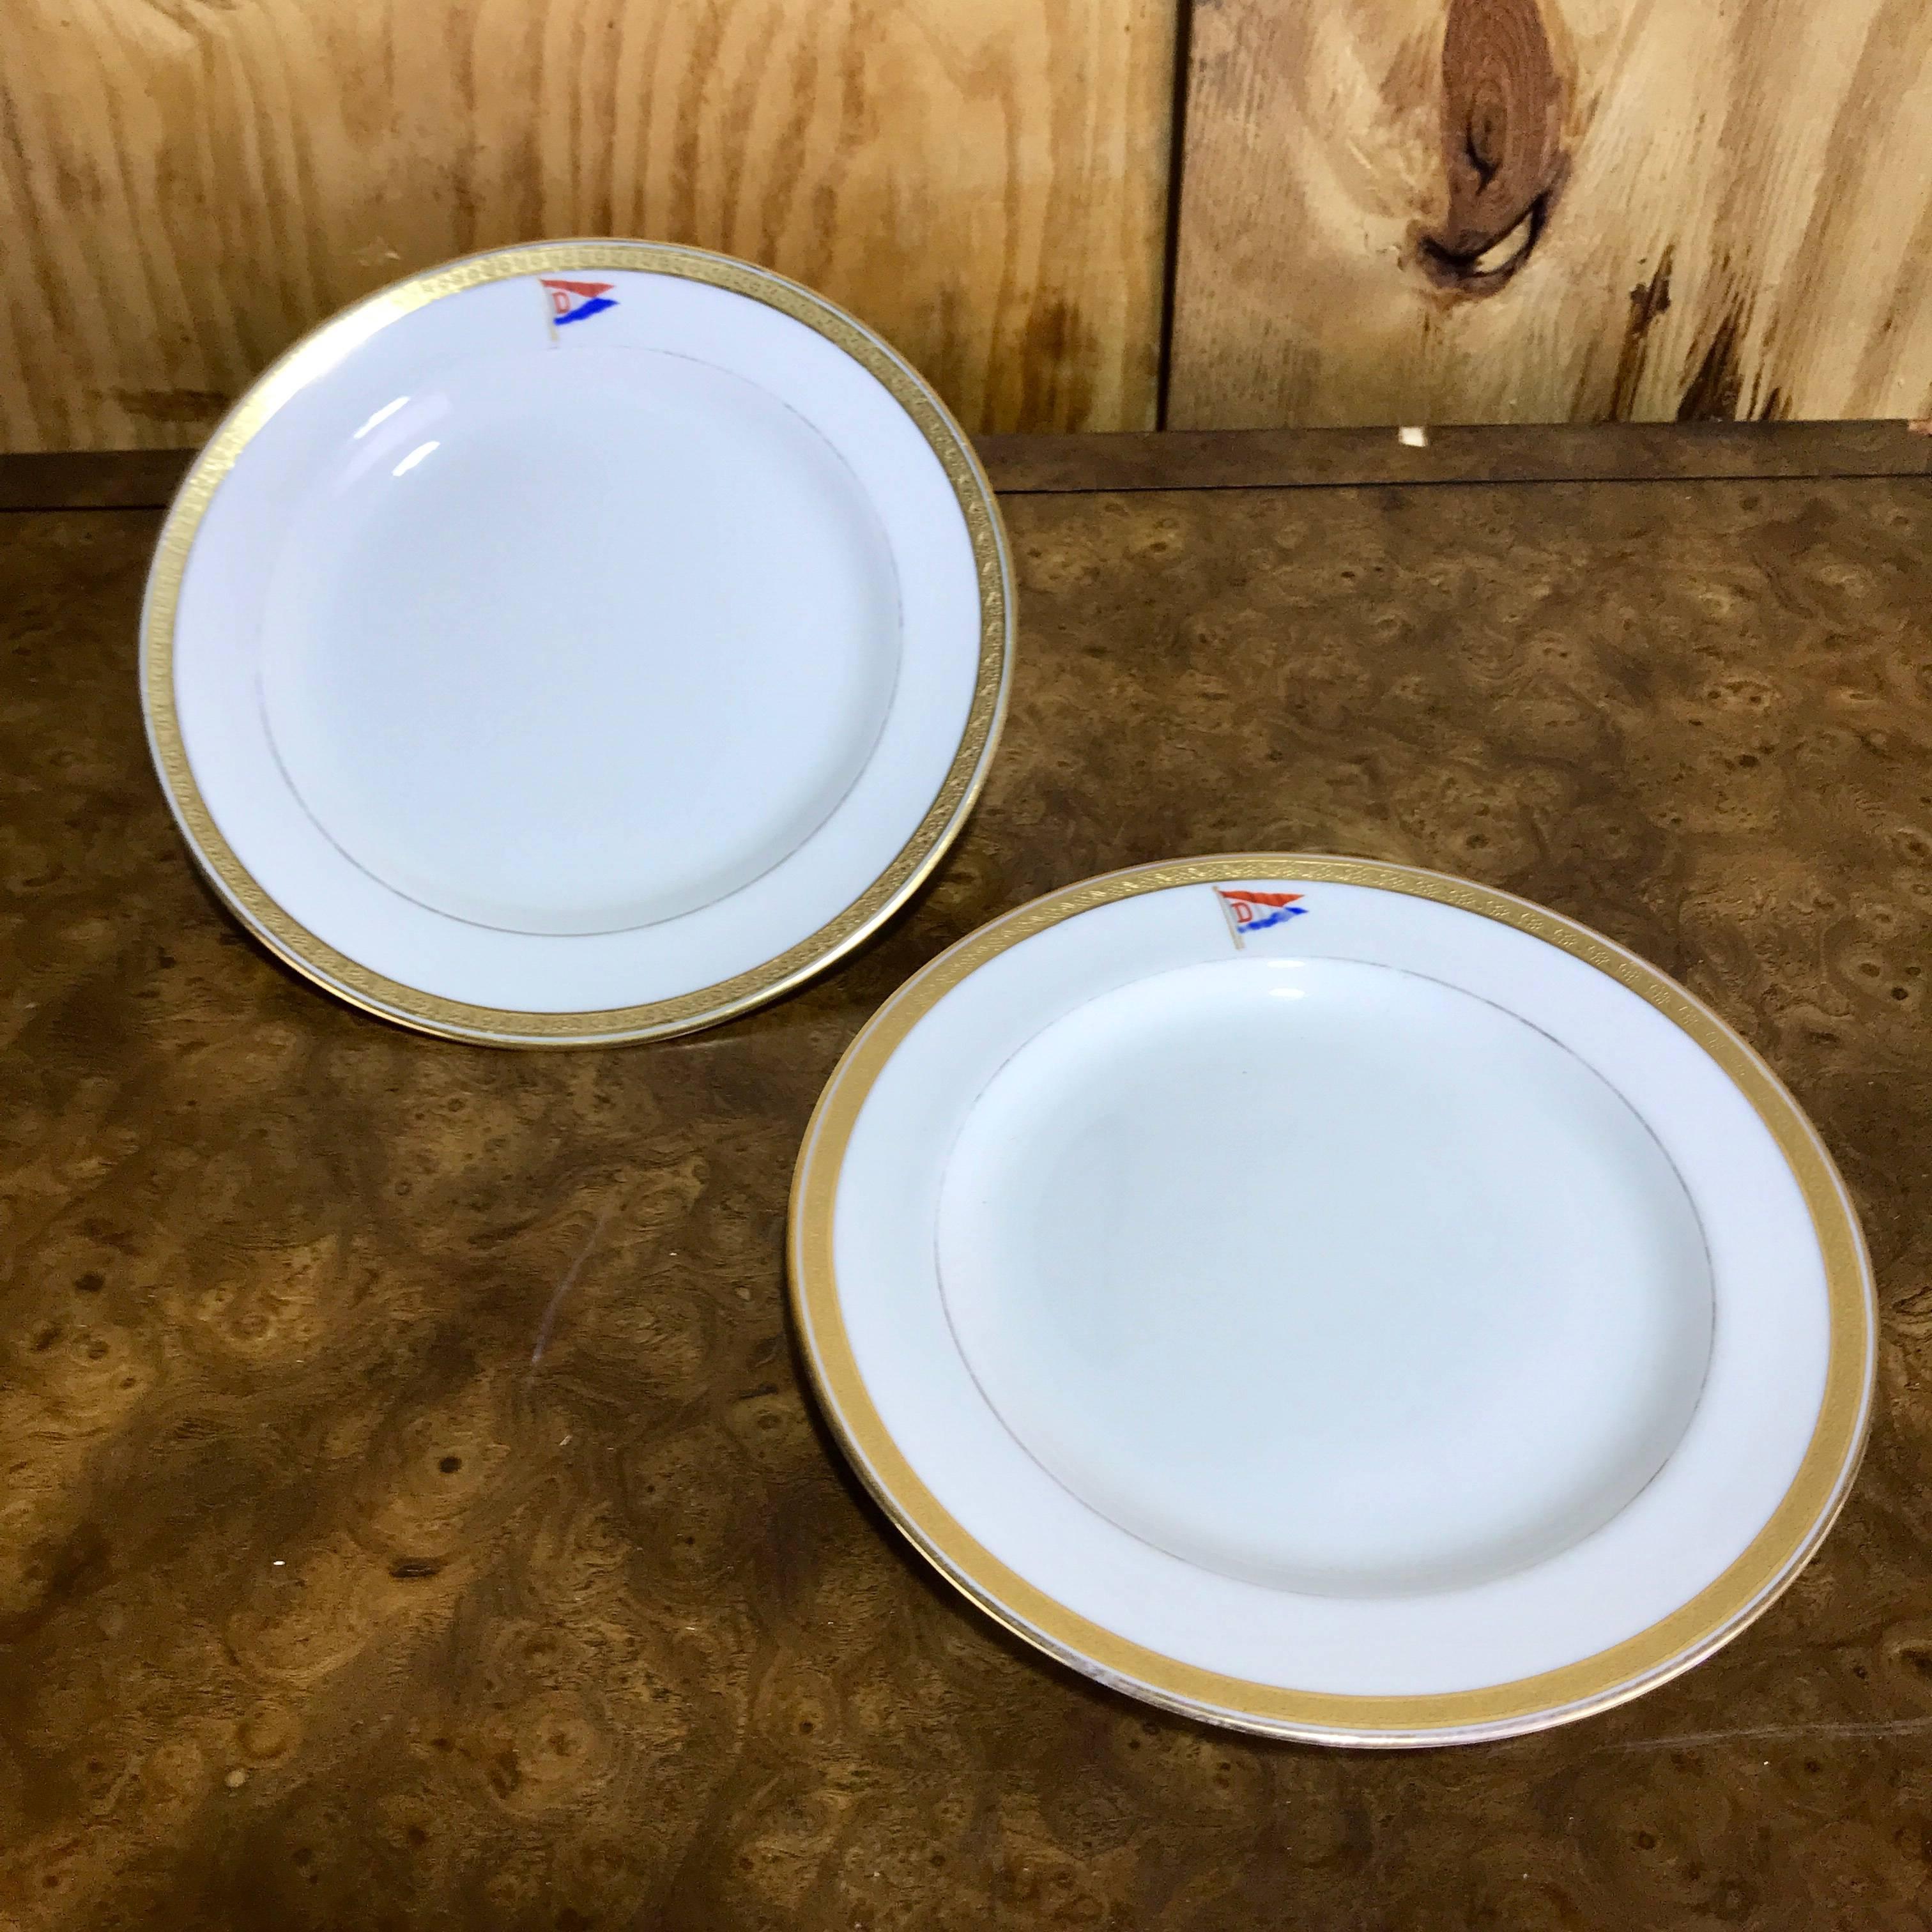 12 First Class Steamship or Yacht Dessert Plates by Cauldon In Good Condition For Sale In West Palm Beach, FL